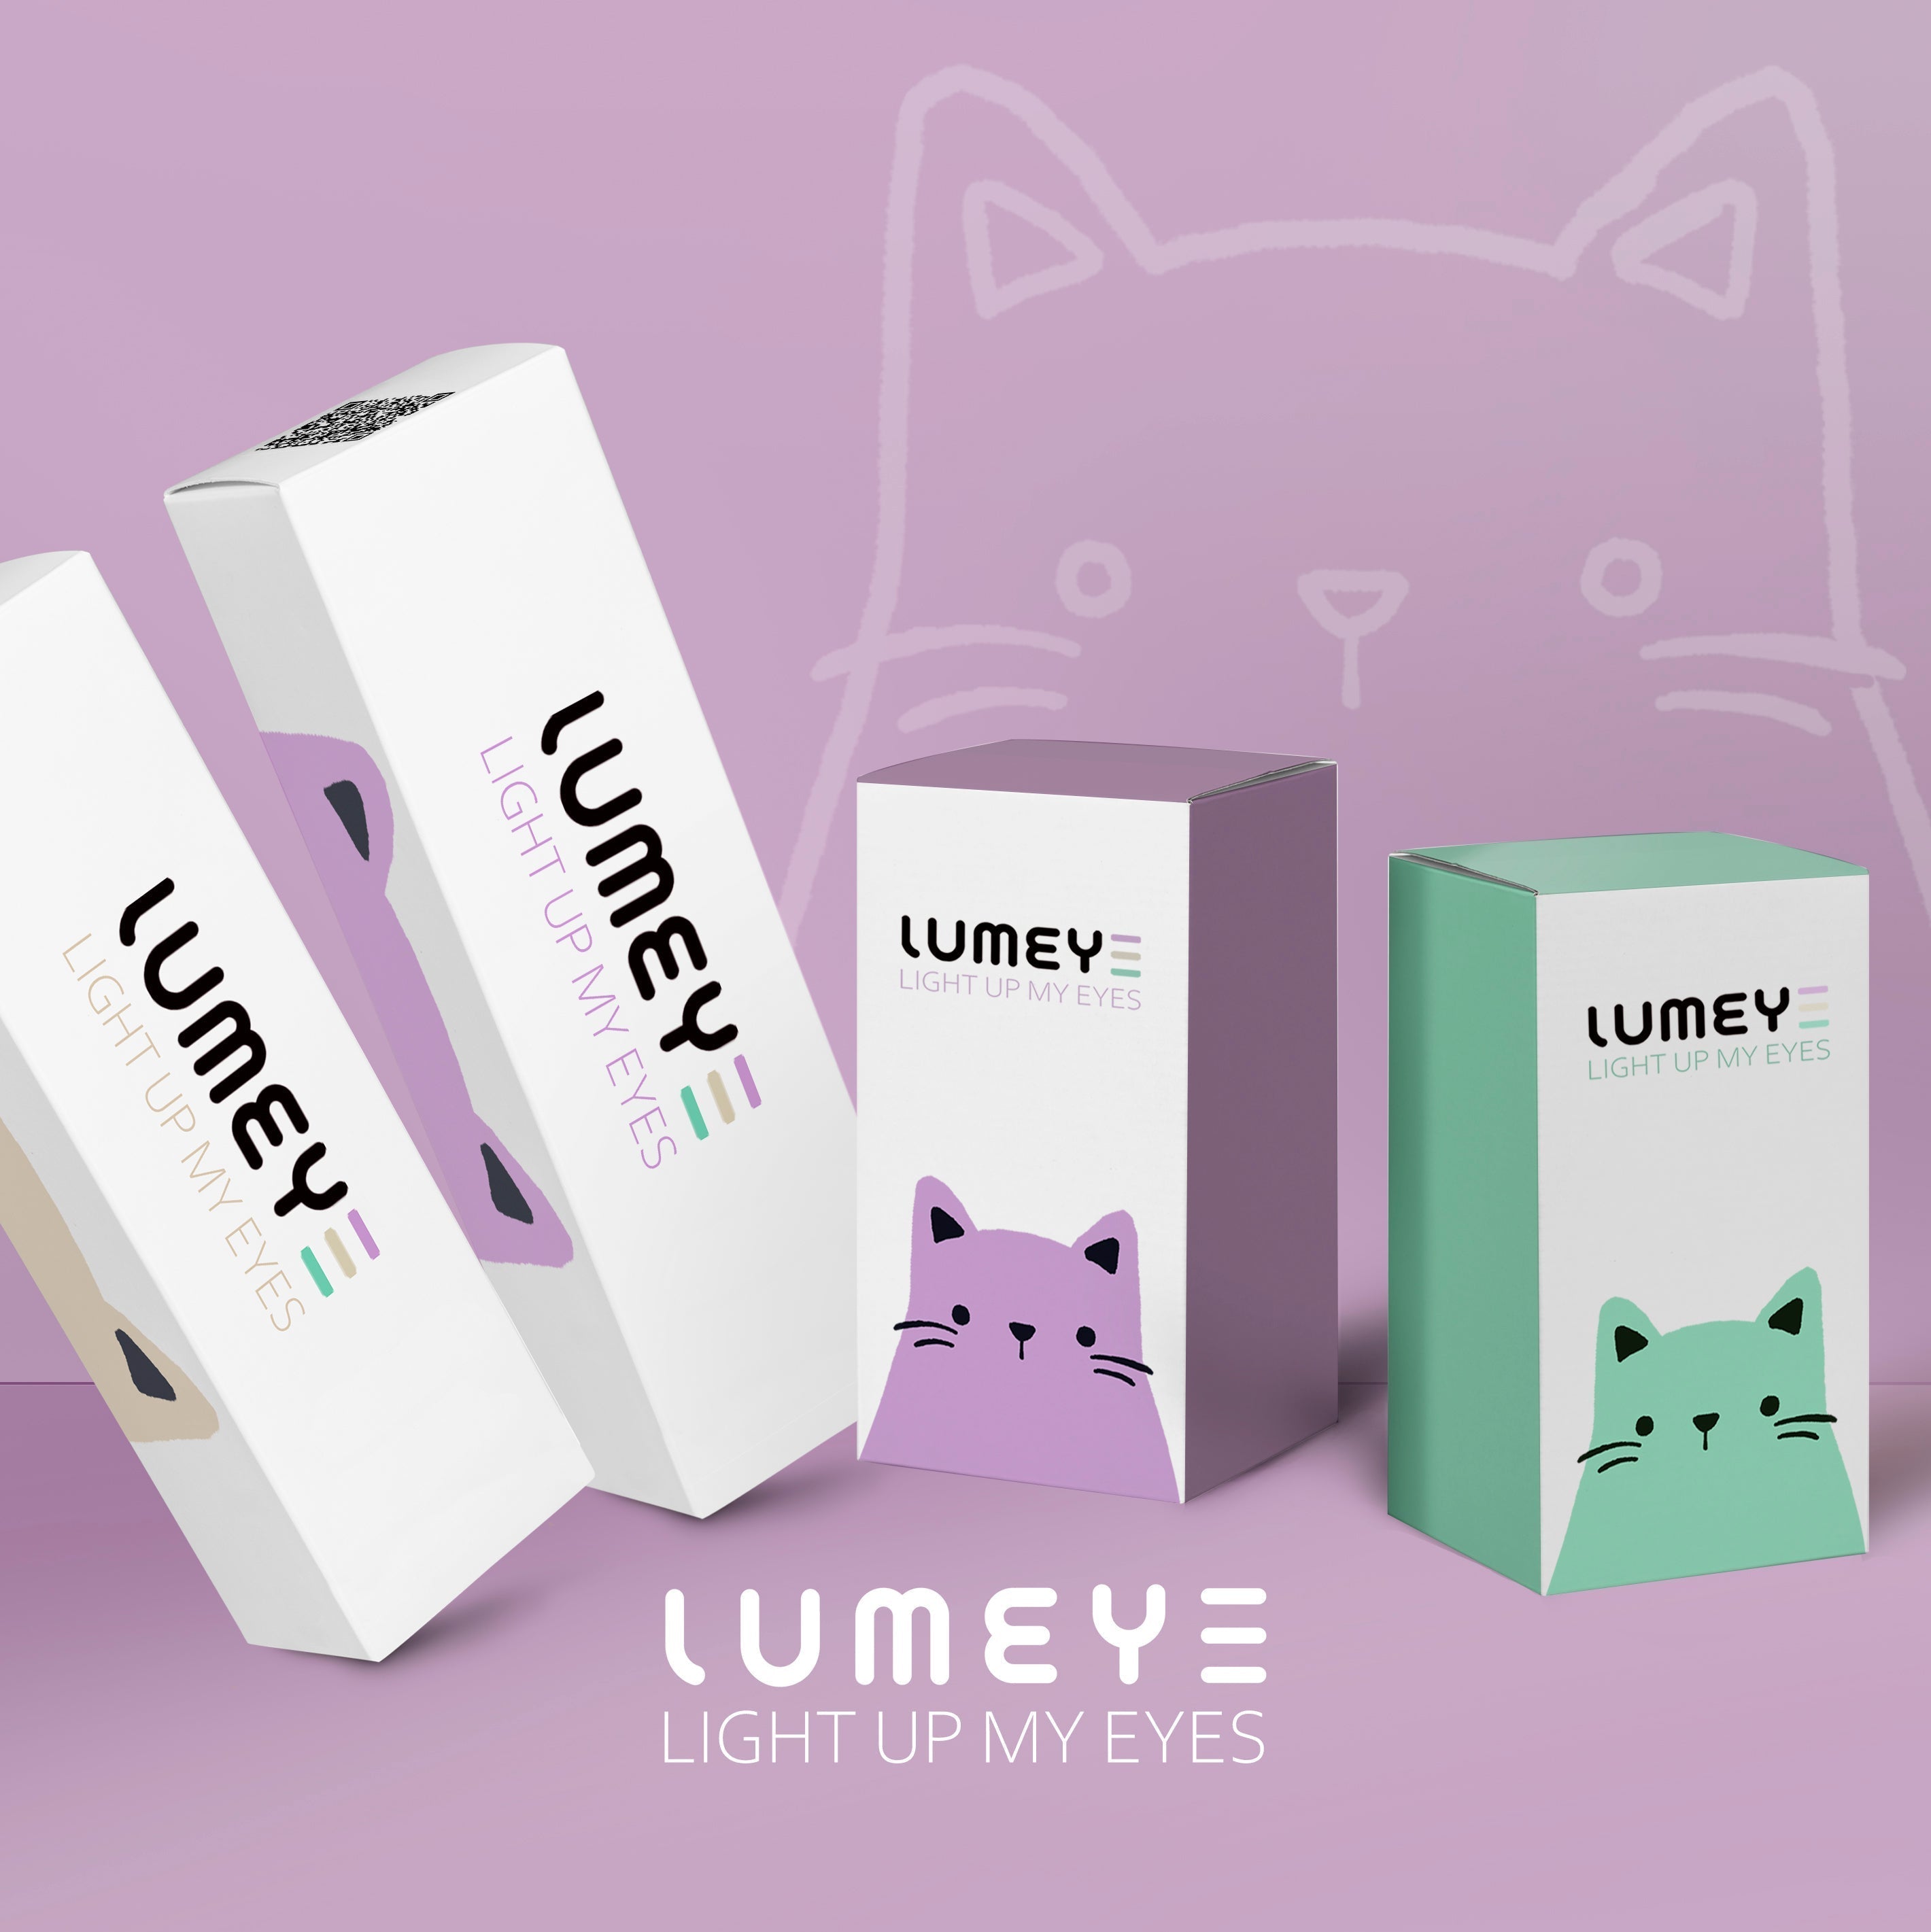 Best COLORED CONTACTS - LUMEYE Psycho Purple Colored Contact Lenses - LUMEYE